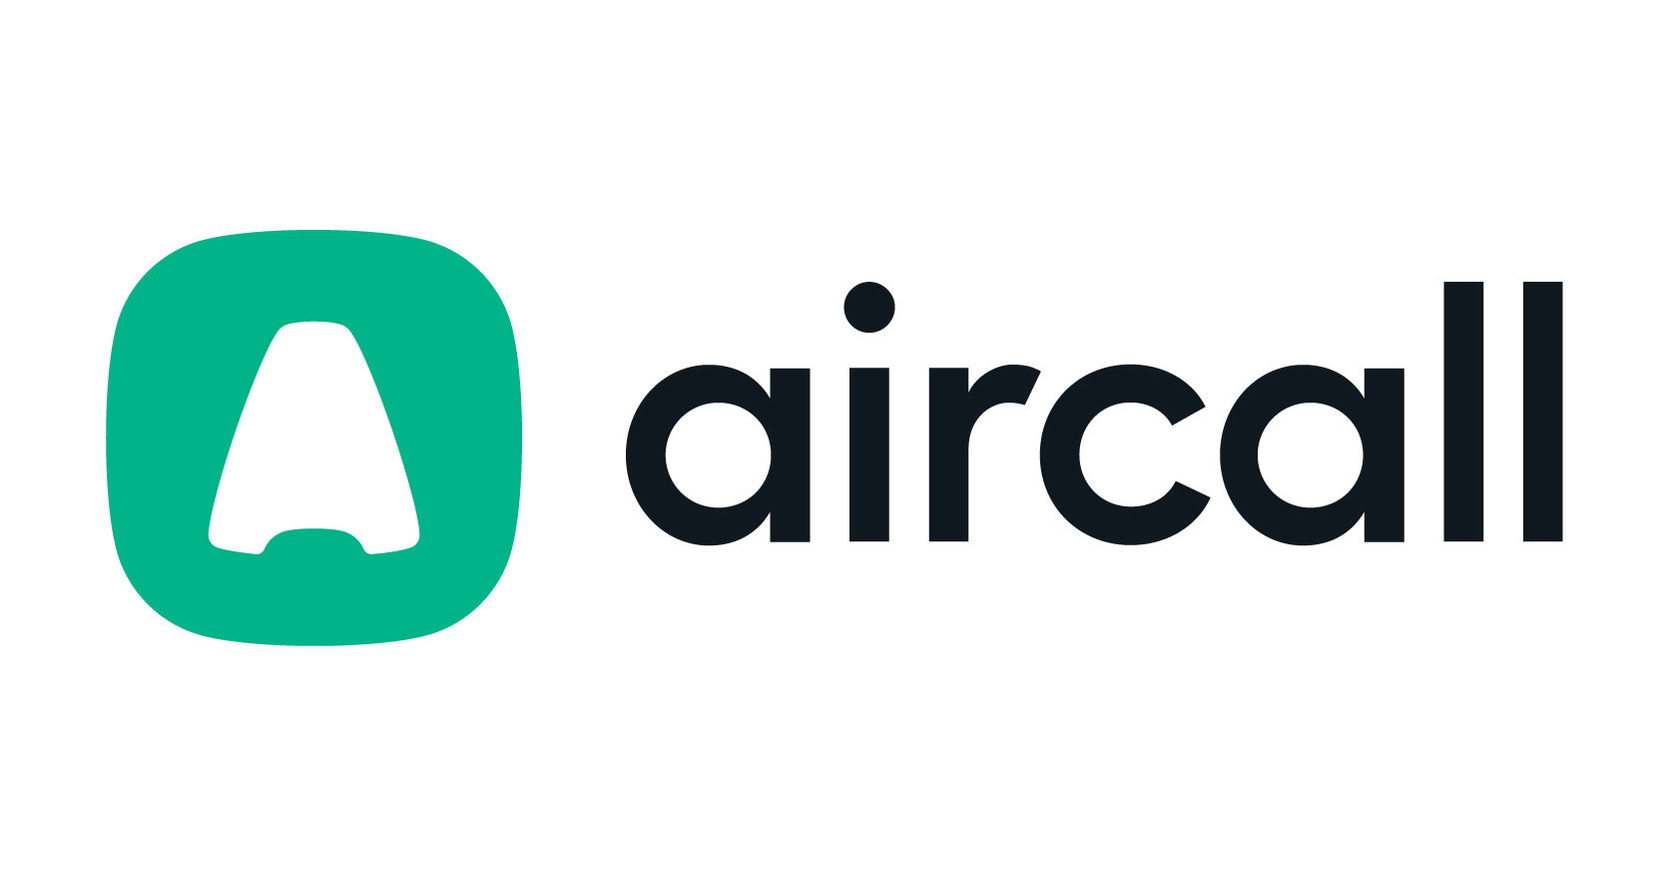 Aircall, now valued above $1bn, raises $120M in Series D funding, led by Goldman Sachs Asset Management